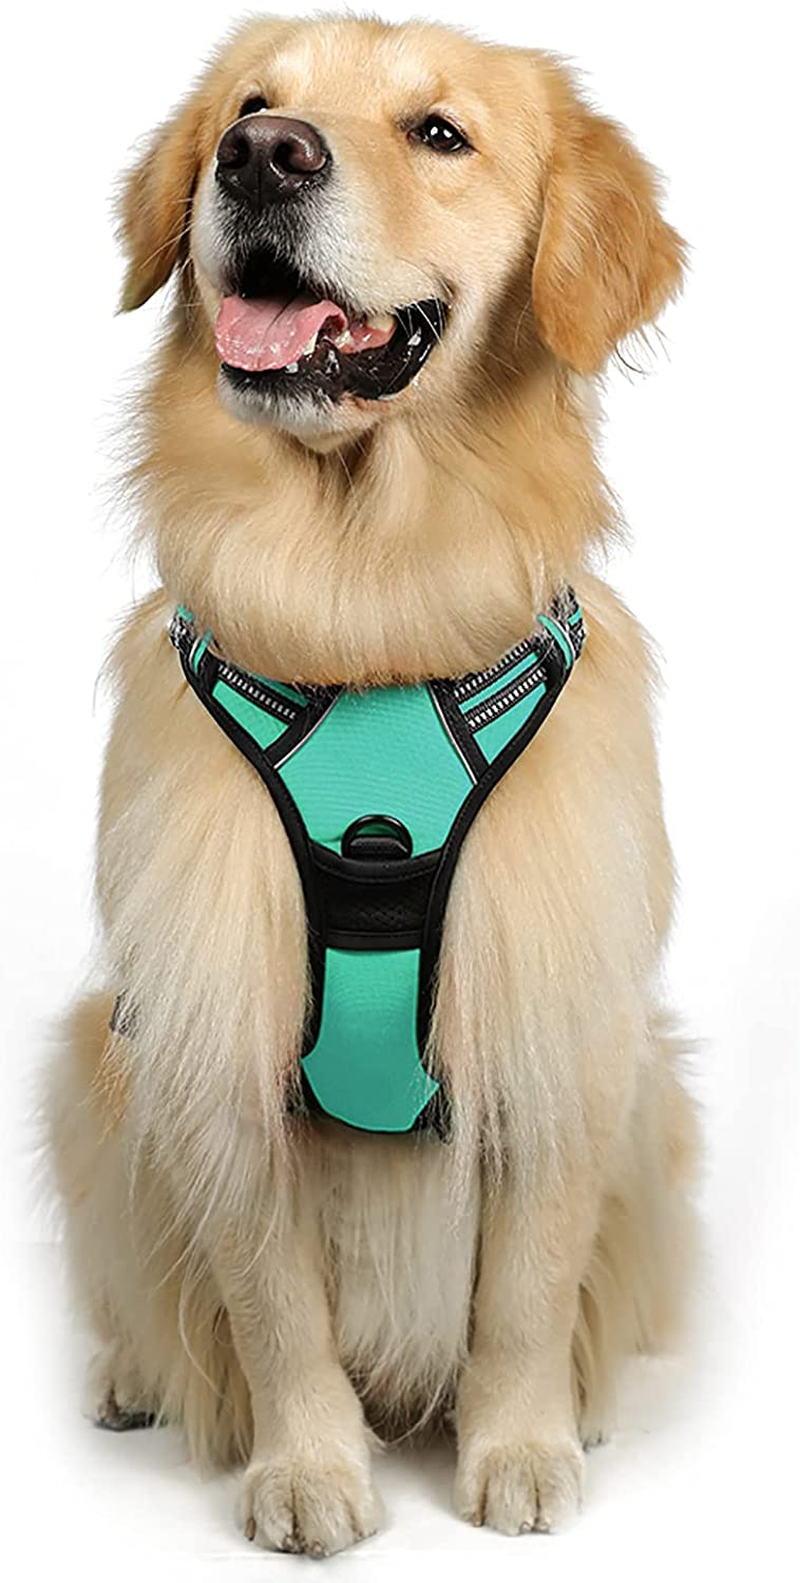 rabbitgoo Dog Harness, No-Pull Pet Harness with 2 Leash Clips, Adjustable Soft Padded Dog Vest, Reflective No-Choke Pet Oxford Vest with Easy Control Handle for Large Dogs, Black, XL  rabbitgoo Mint Green X-Large 